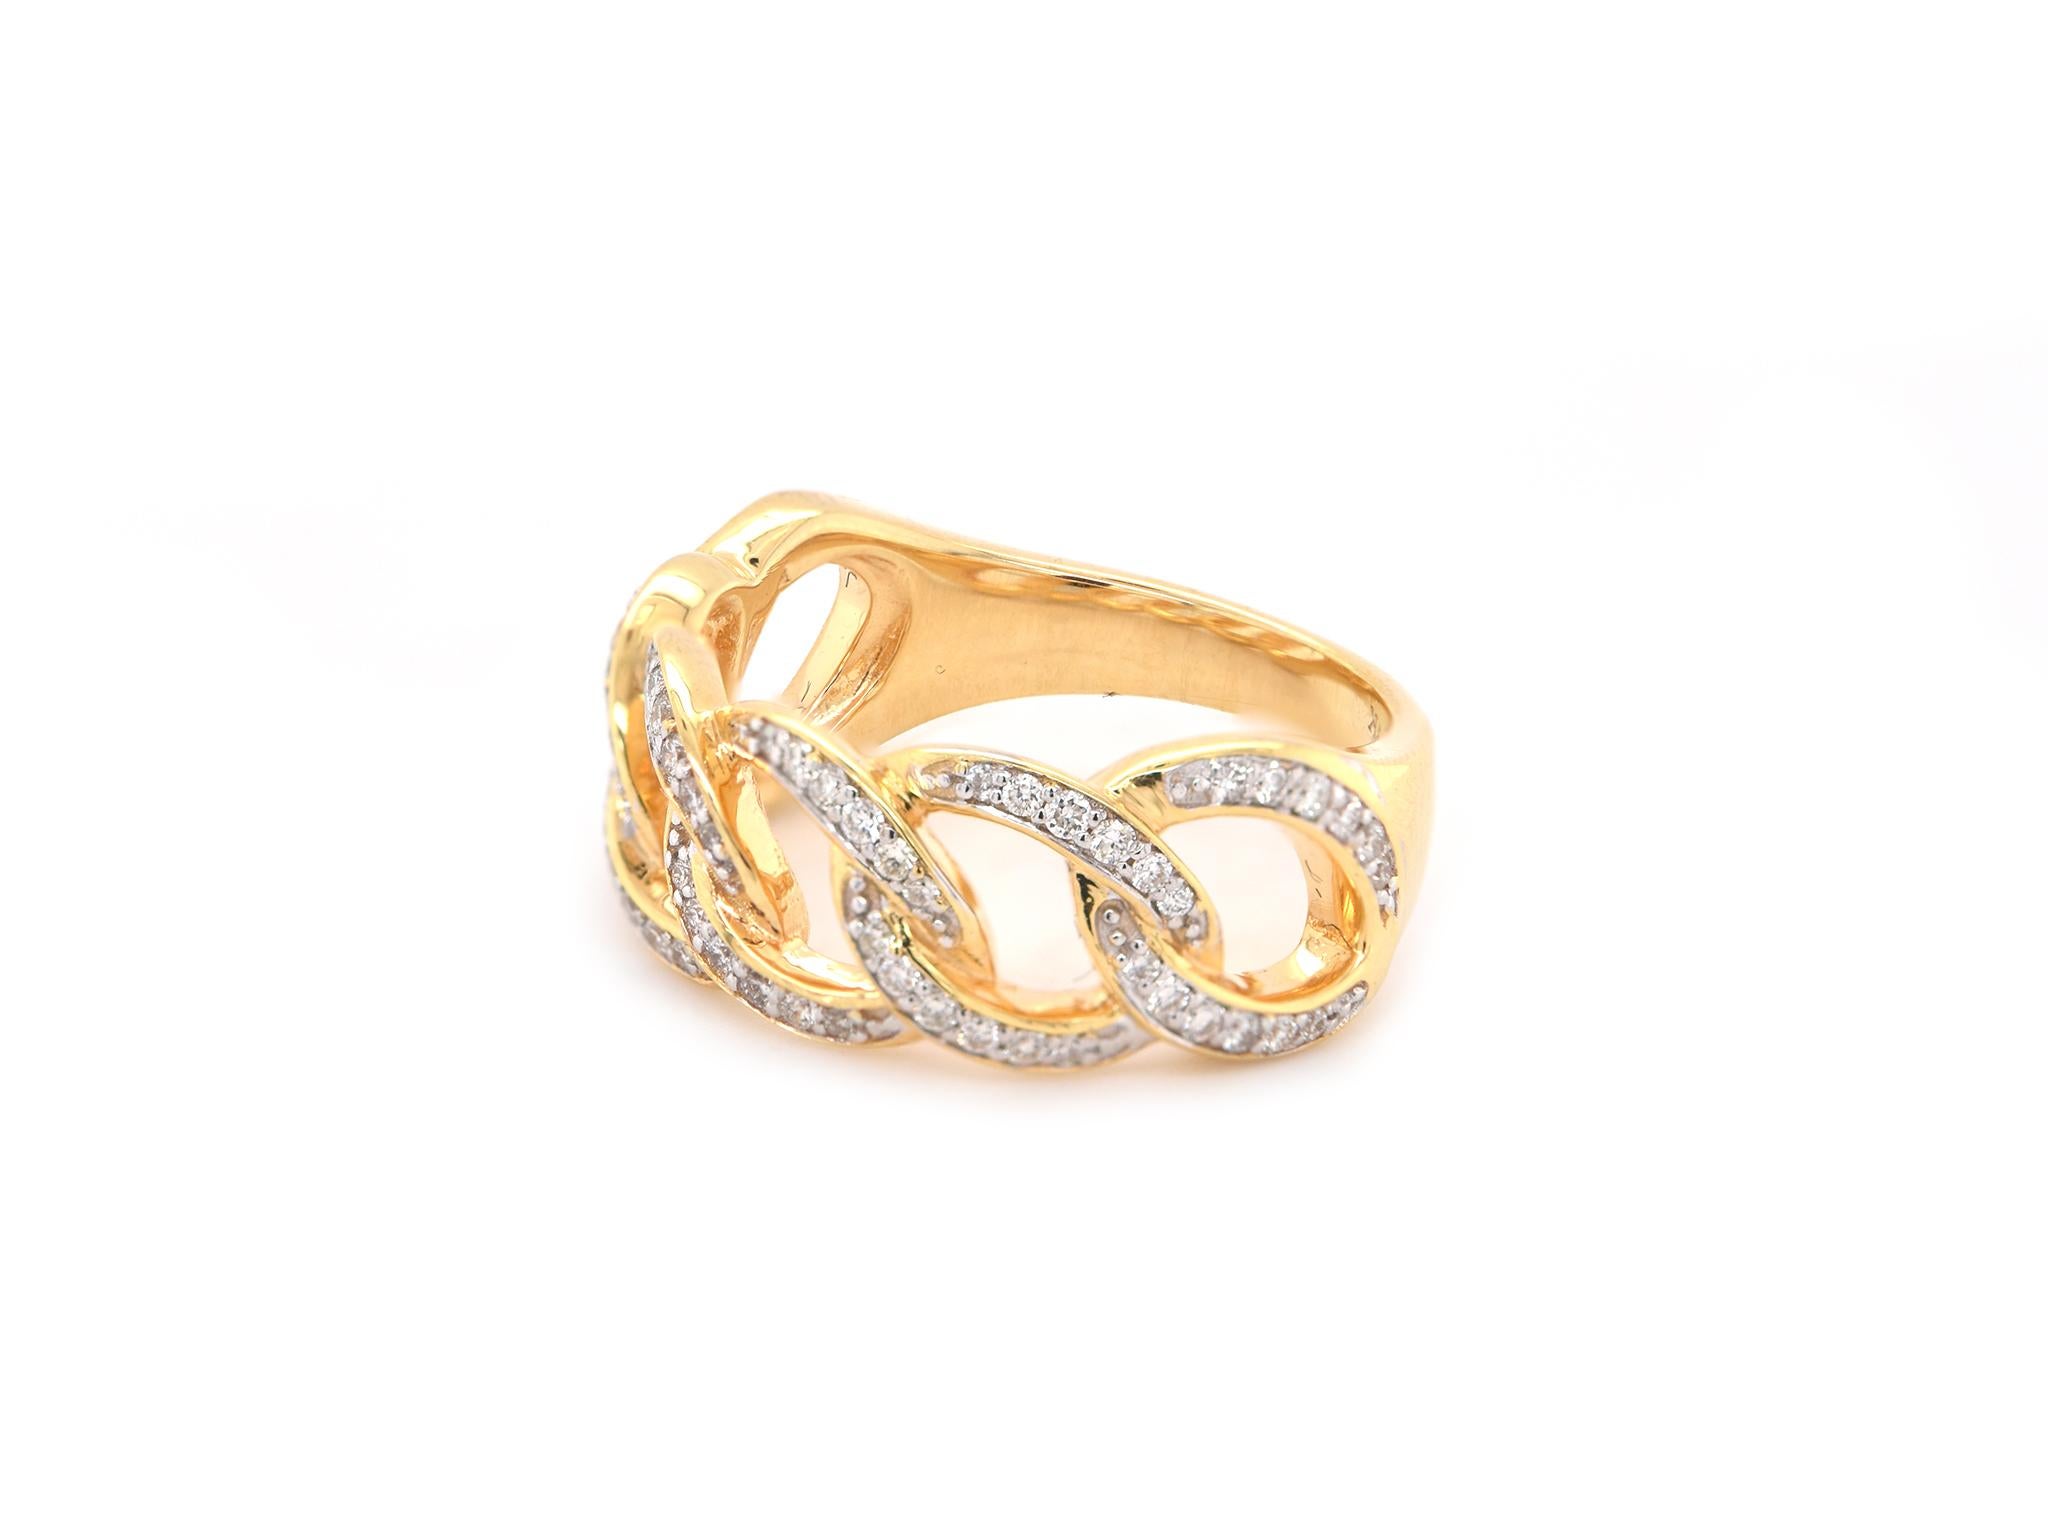 Designer: custom
Material: 14K yellow gold
Diamonds: 72 round cut = 1.00cttw
Color: G
Clarity: VS2
Size: 6.5 (please allow two additional shipping days for sizing requests)  
Dimensions: ring measures 8.14mm in width
Weight: 5.58 grams
